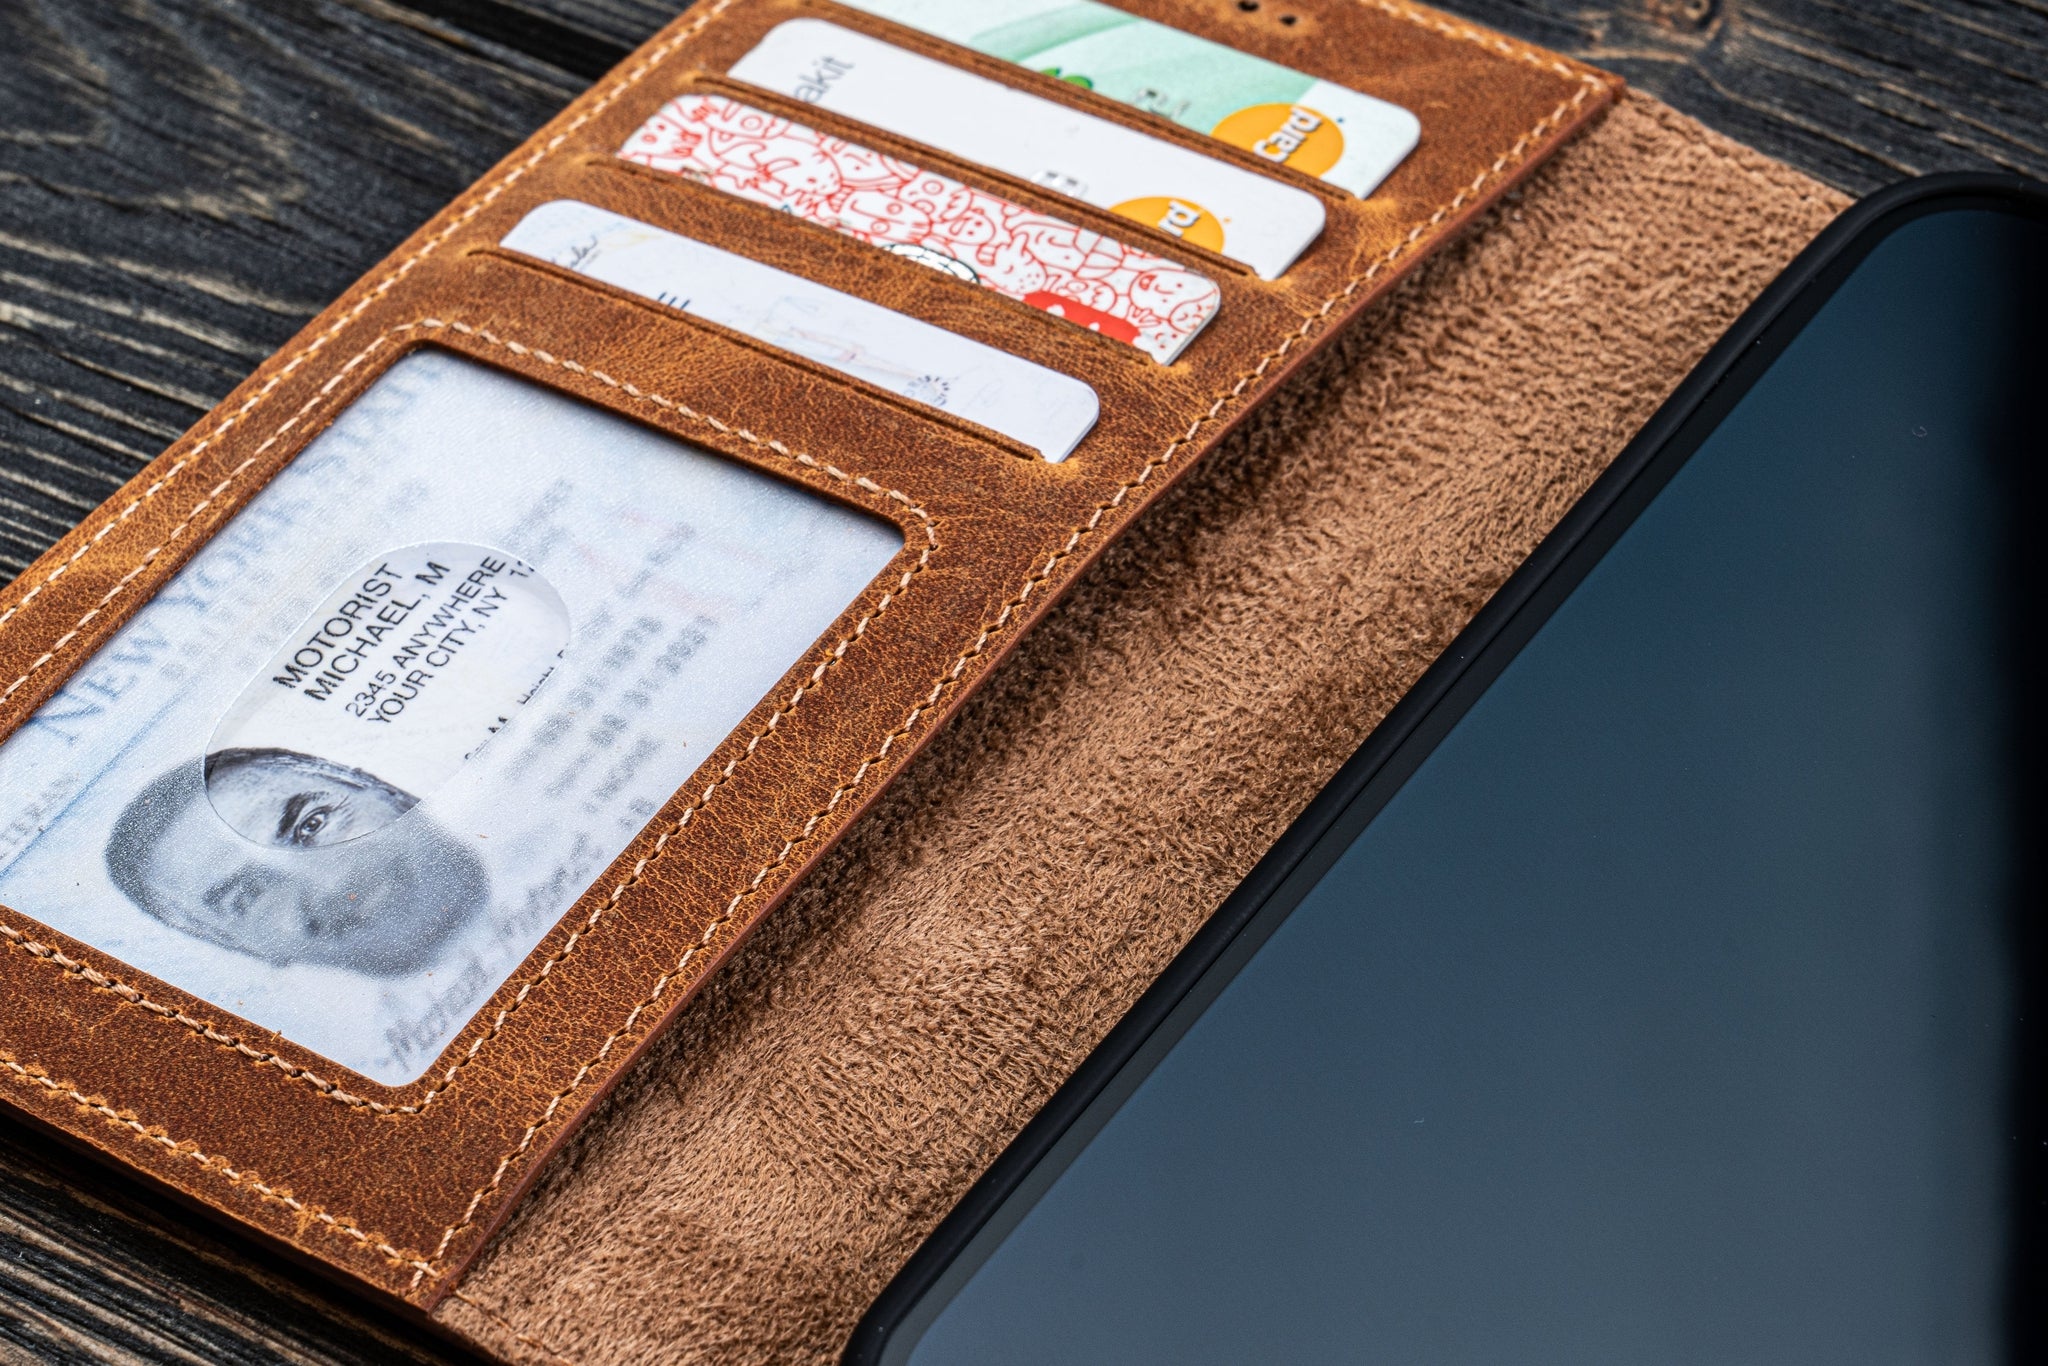 Apple iPhone 12 Leather Wallet Review